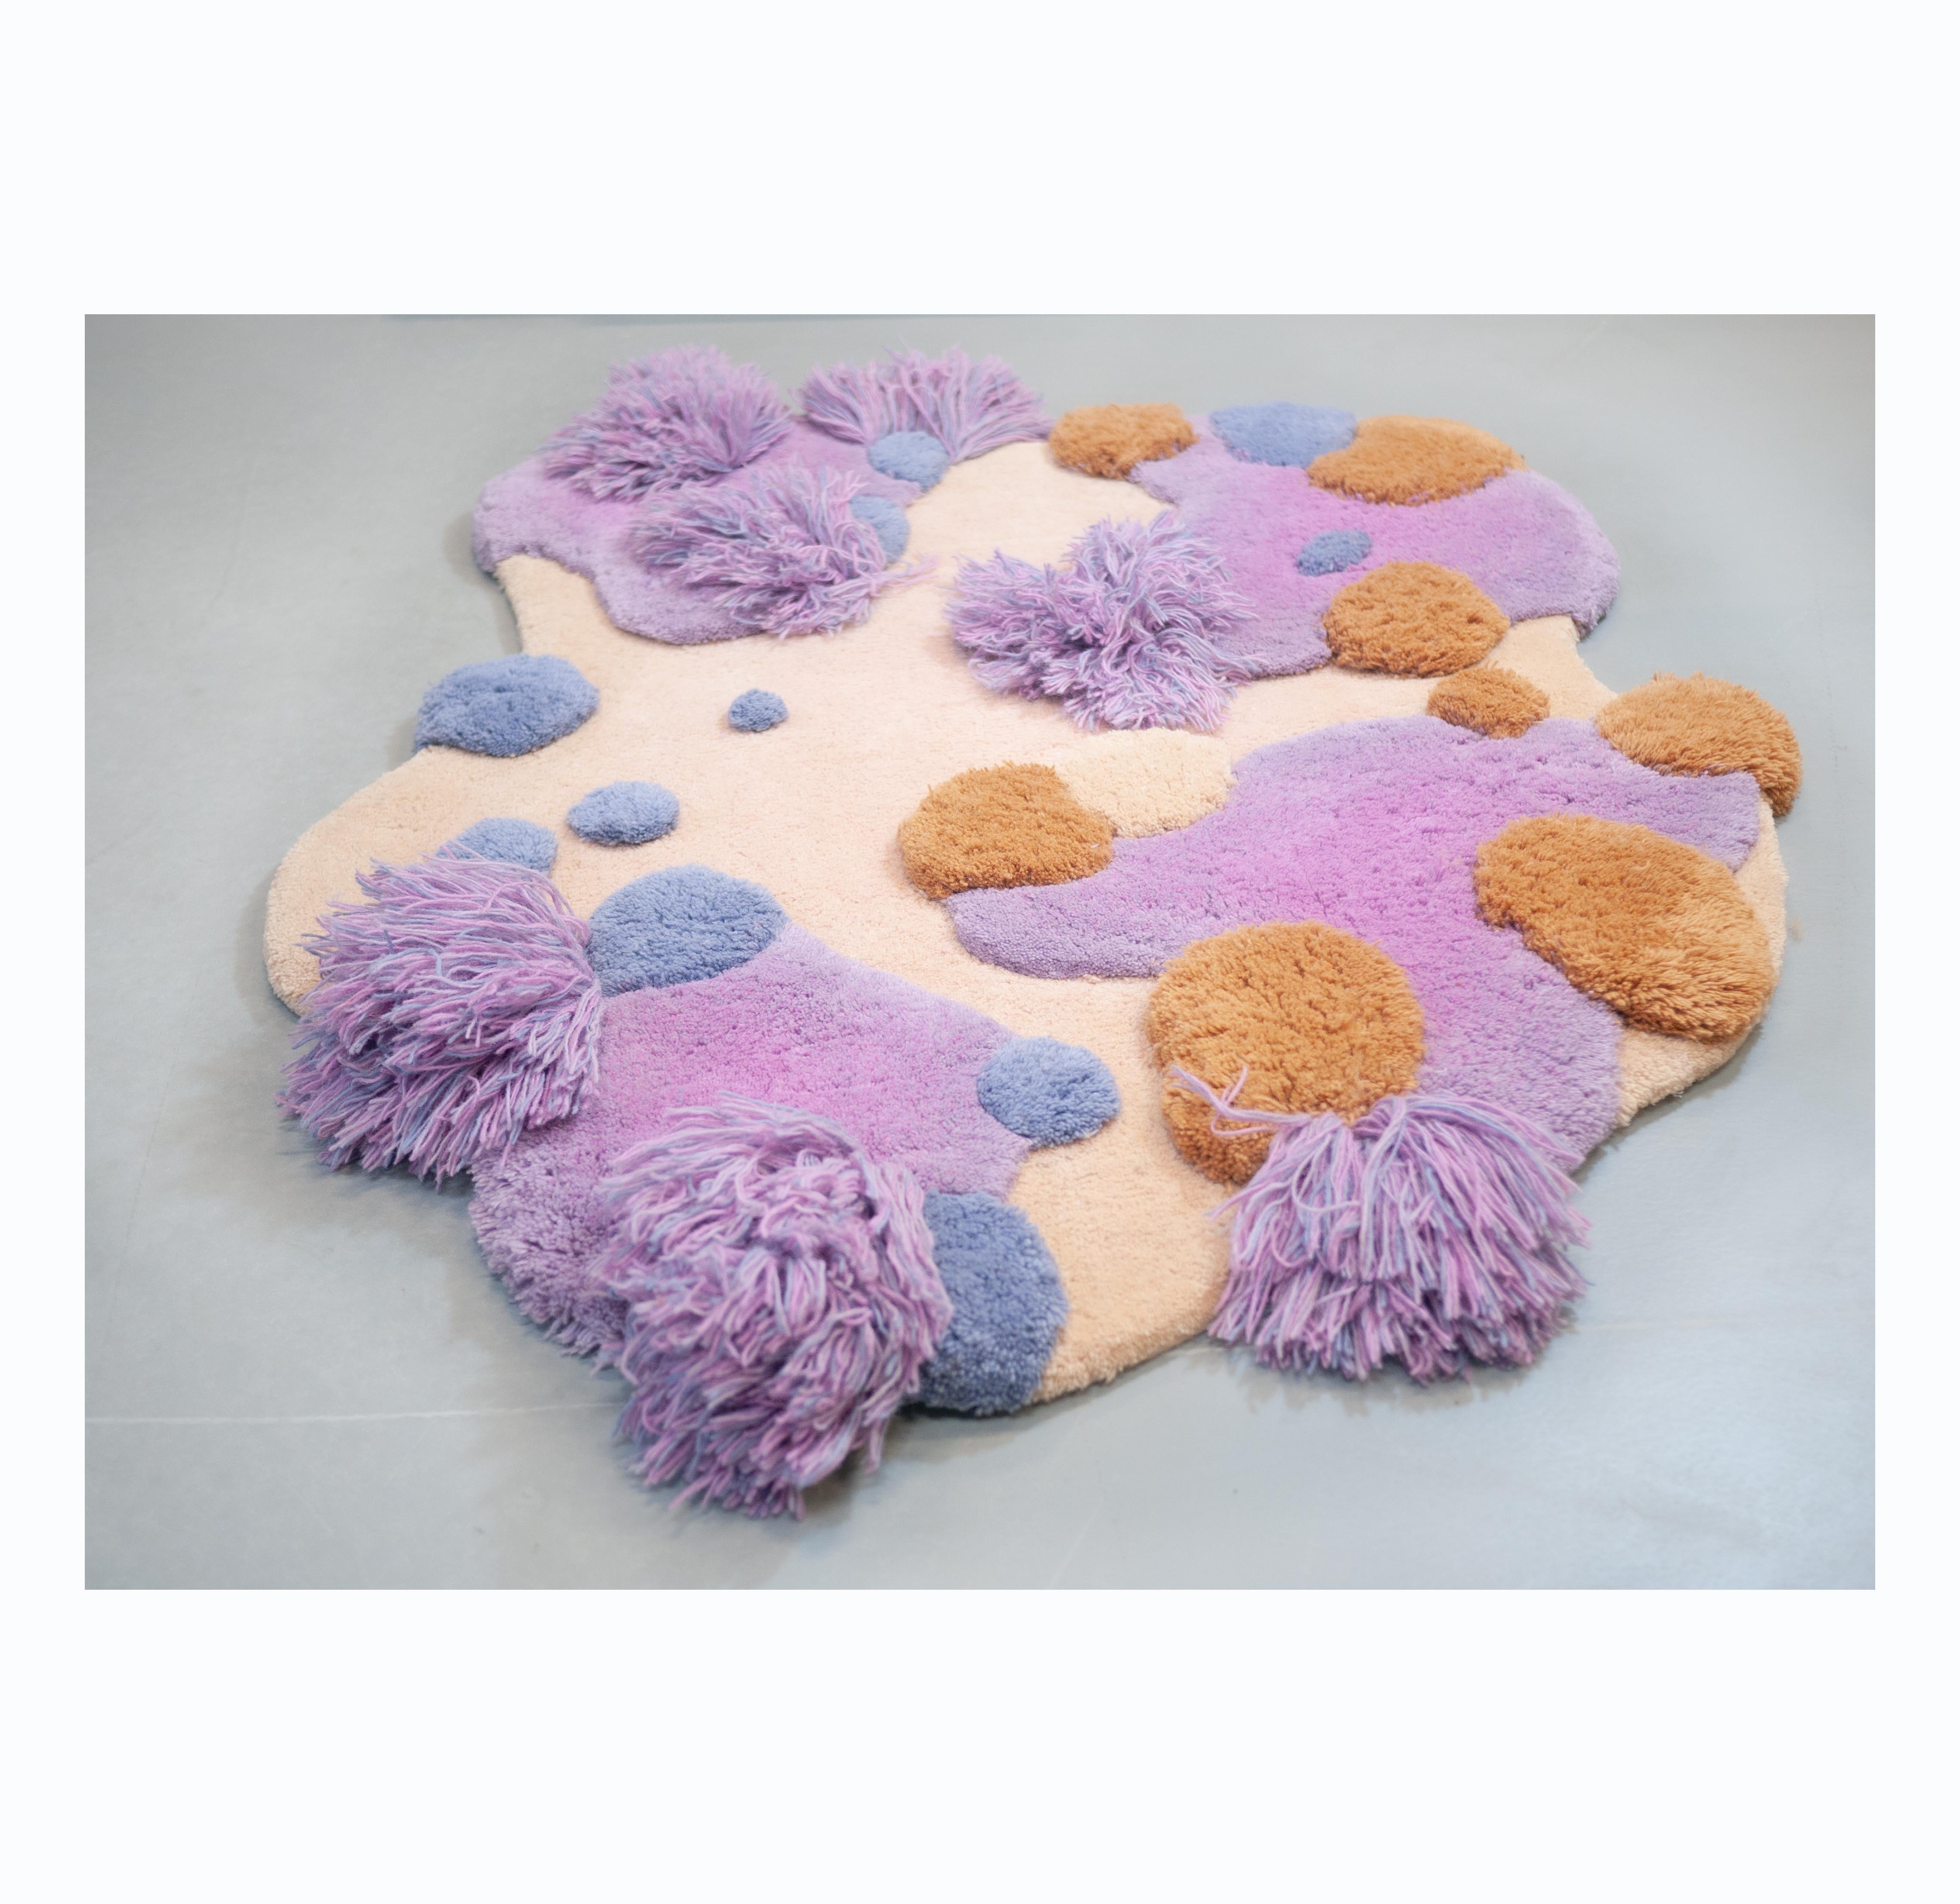 Wool Contemporary, Wild Colourful Carpet, Velvet Tingle by Alfie Furry Friends